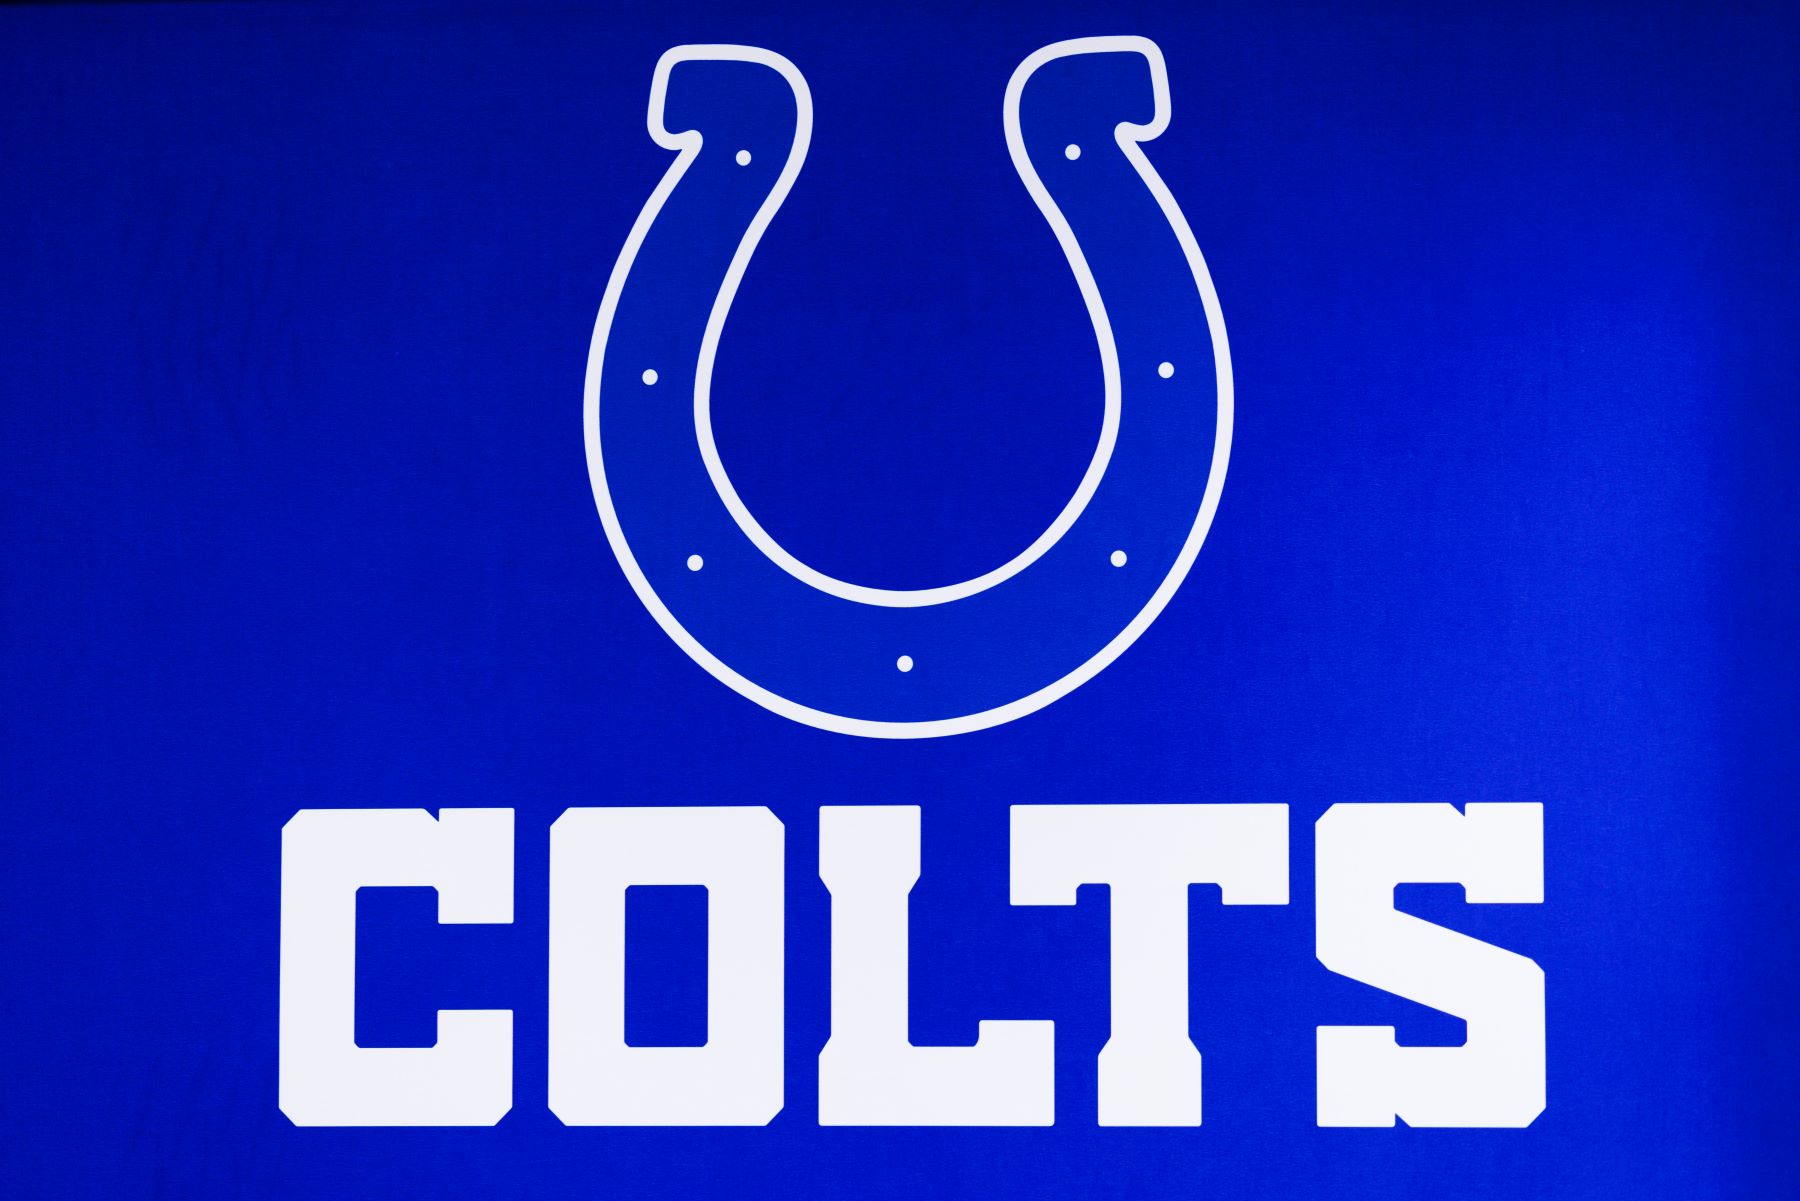 NFL team Indianapolis Colts logo seen at the Los Angeles Convention Center during the Super Bowl Experience